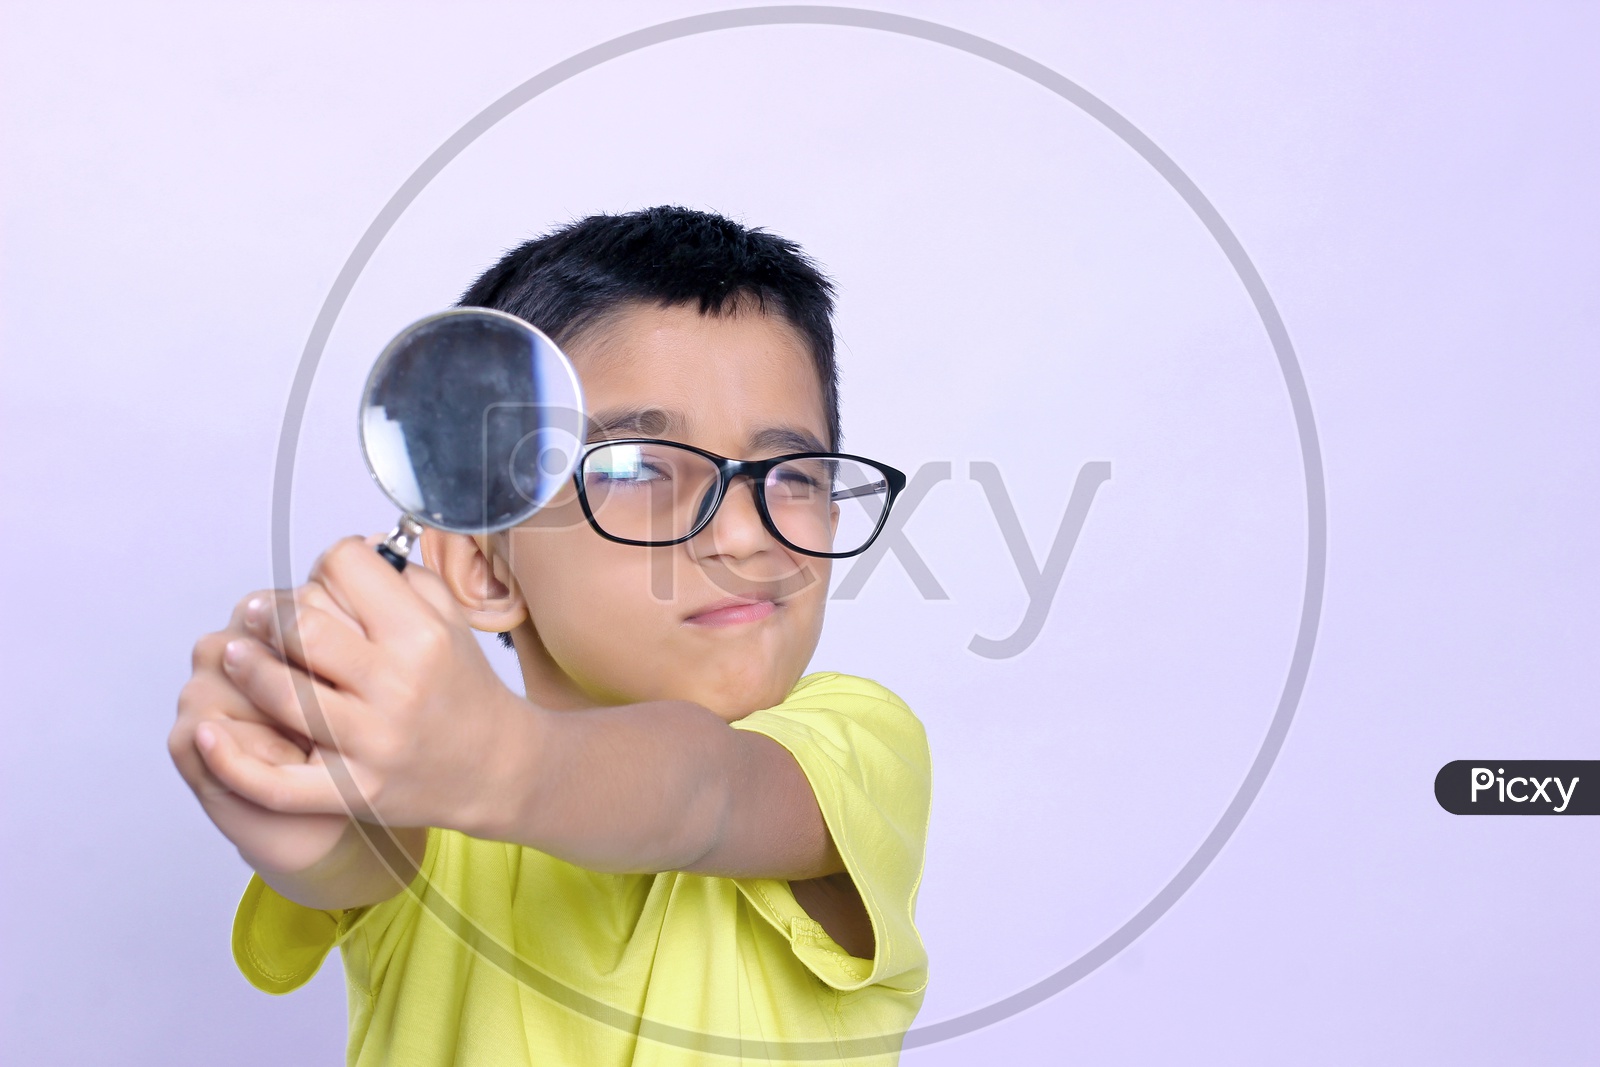 Indian Child on Eyeglass Holding Magnifying Glass